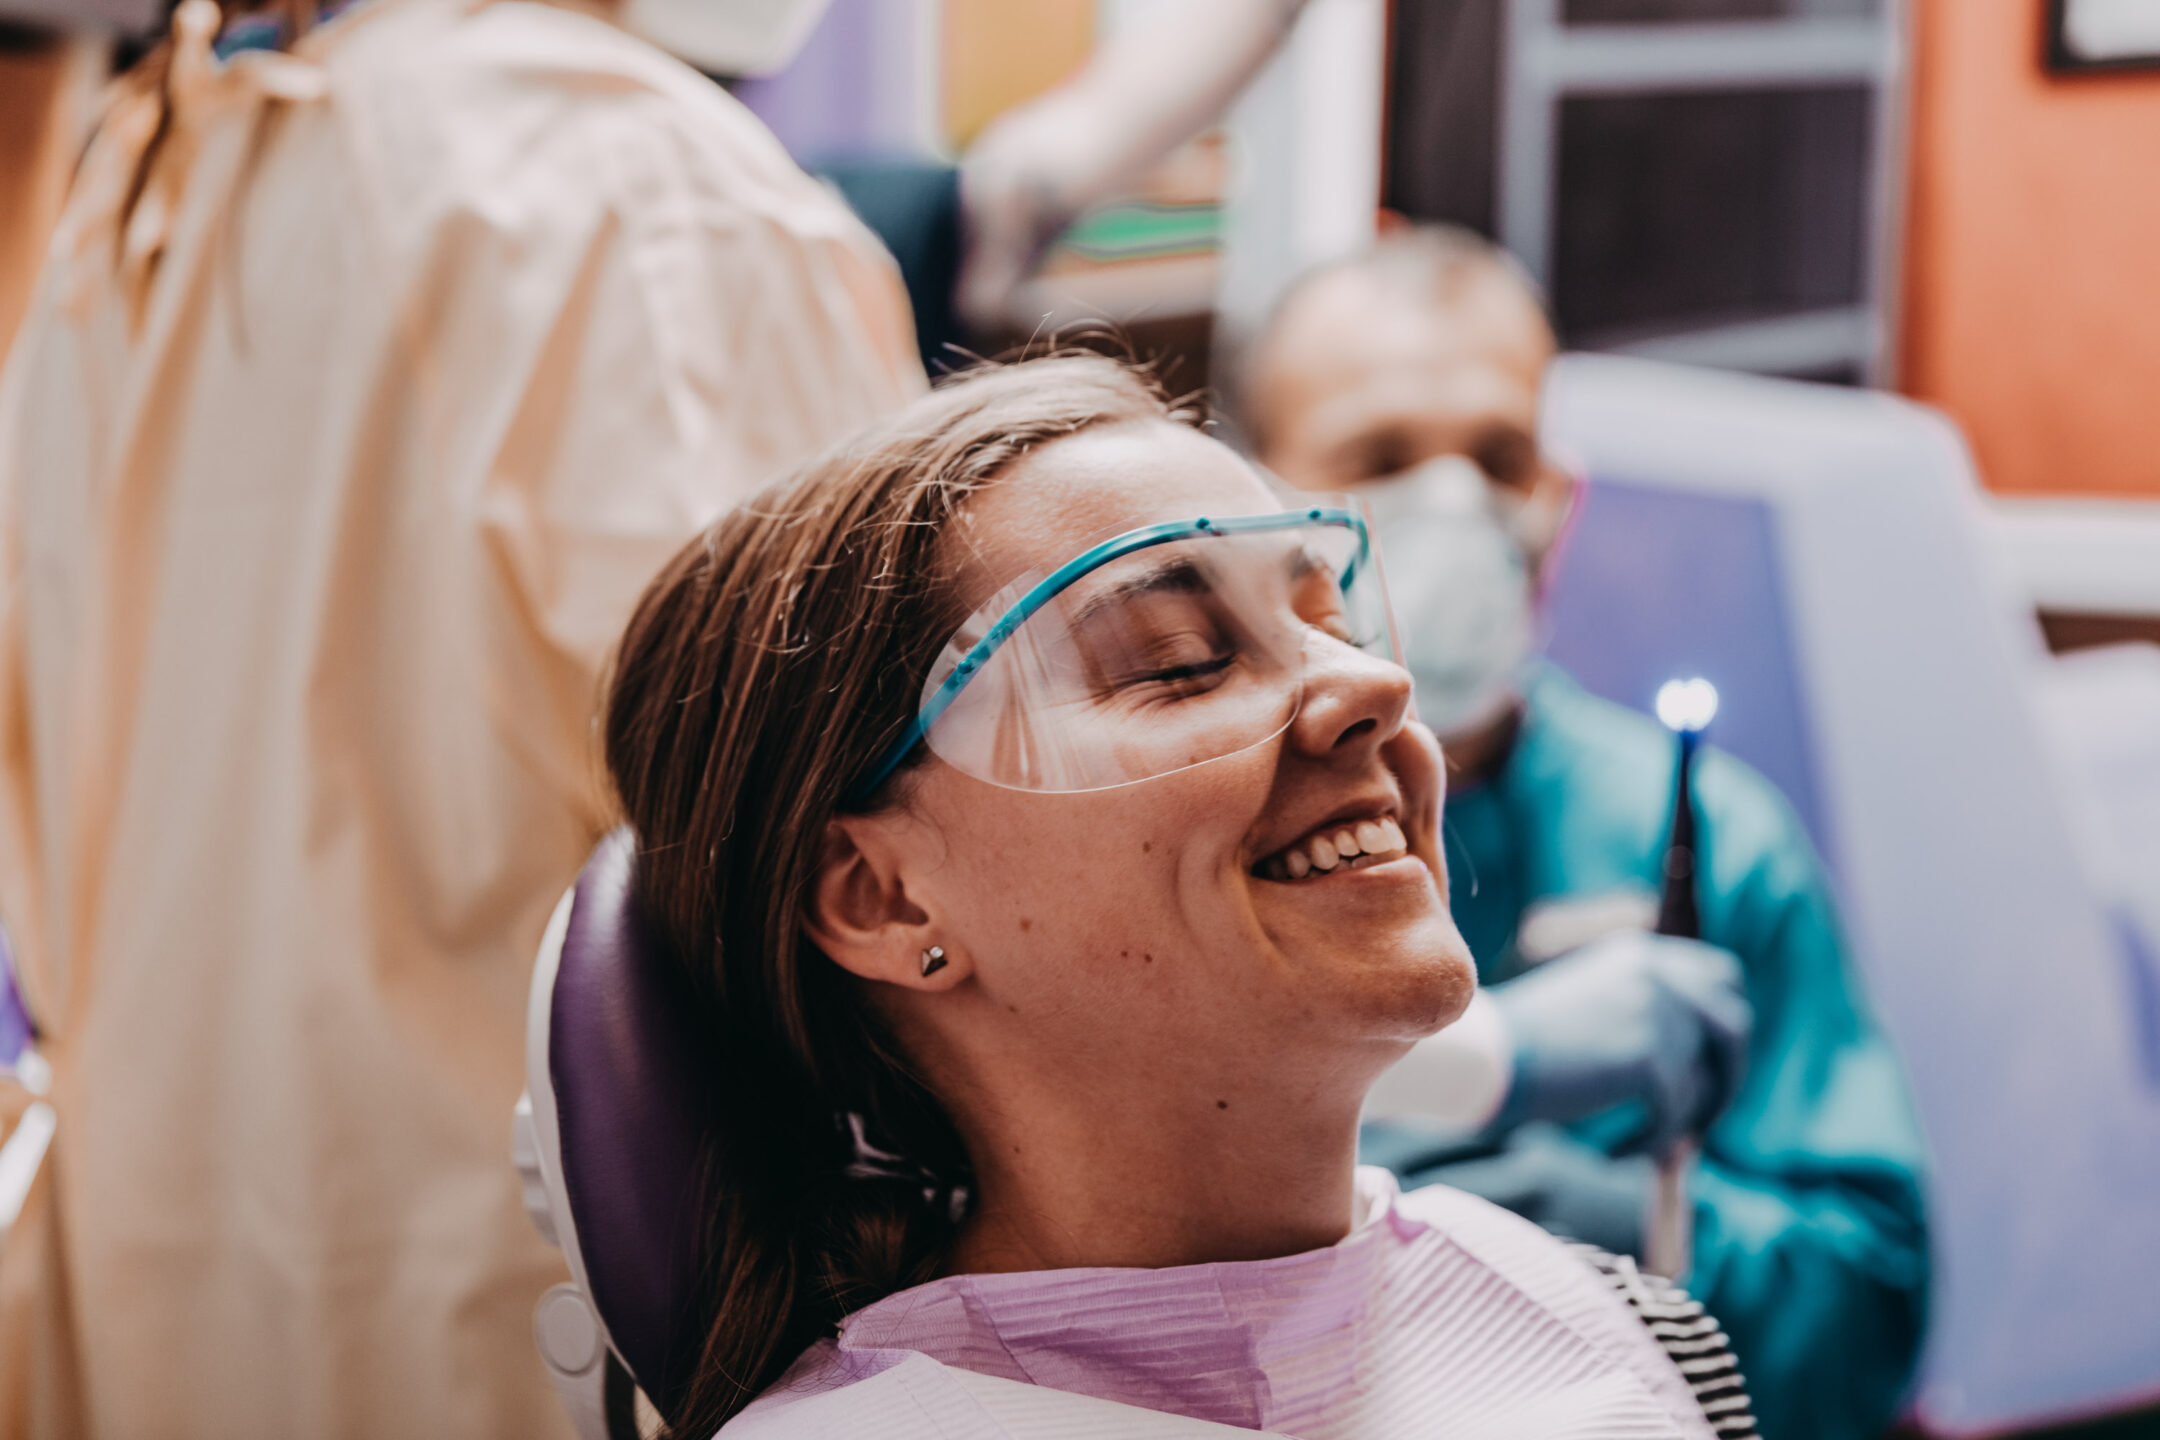  Female dental patient smiling in dentist’s chair and wearing protective goggles.